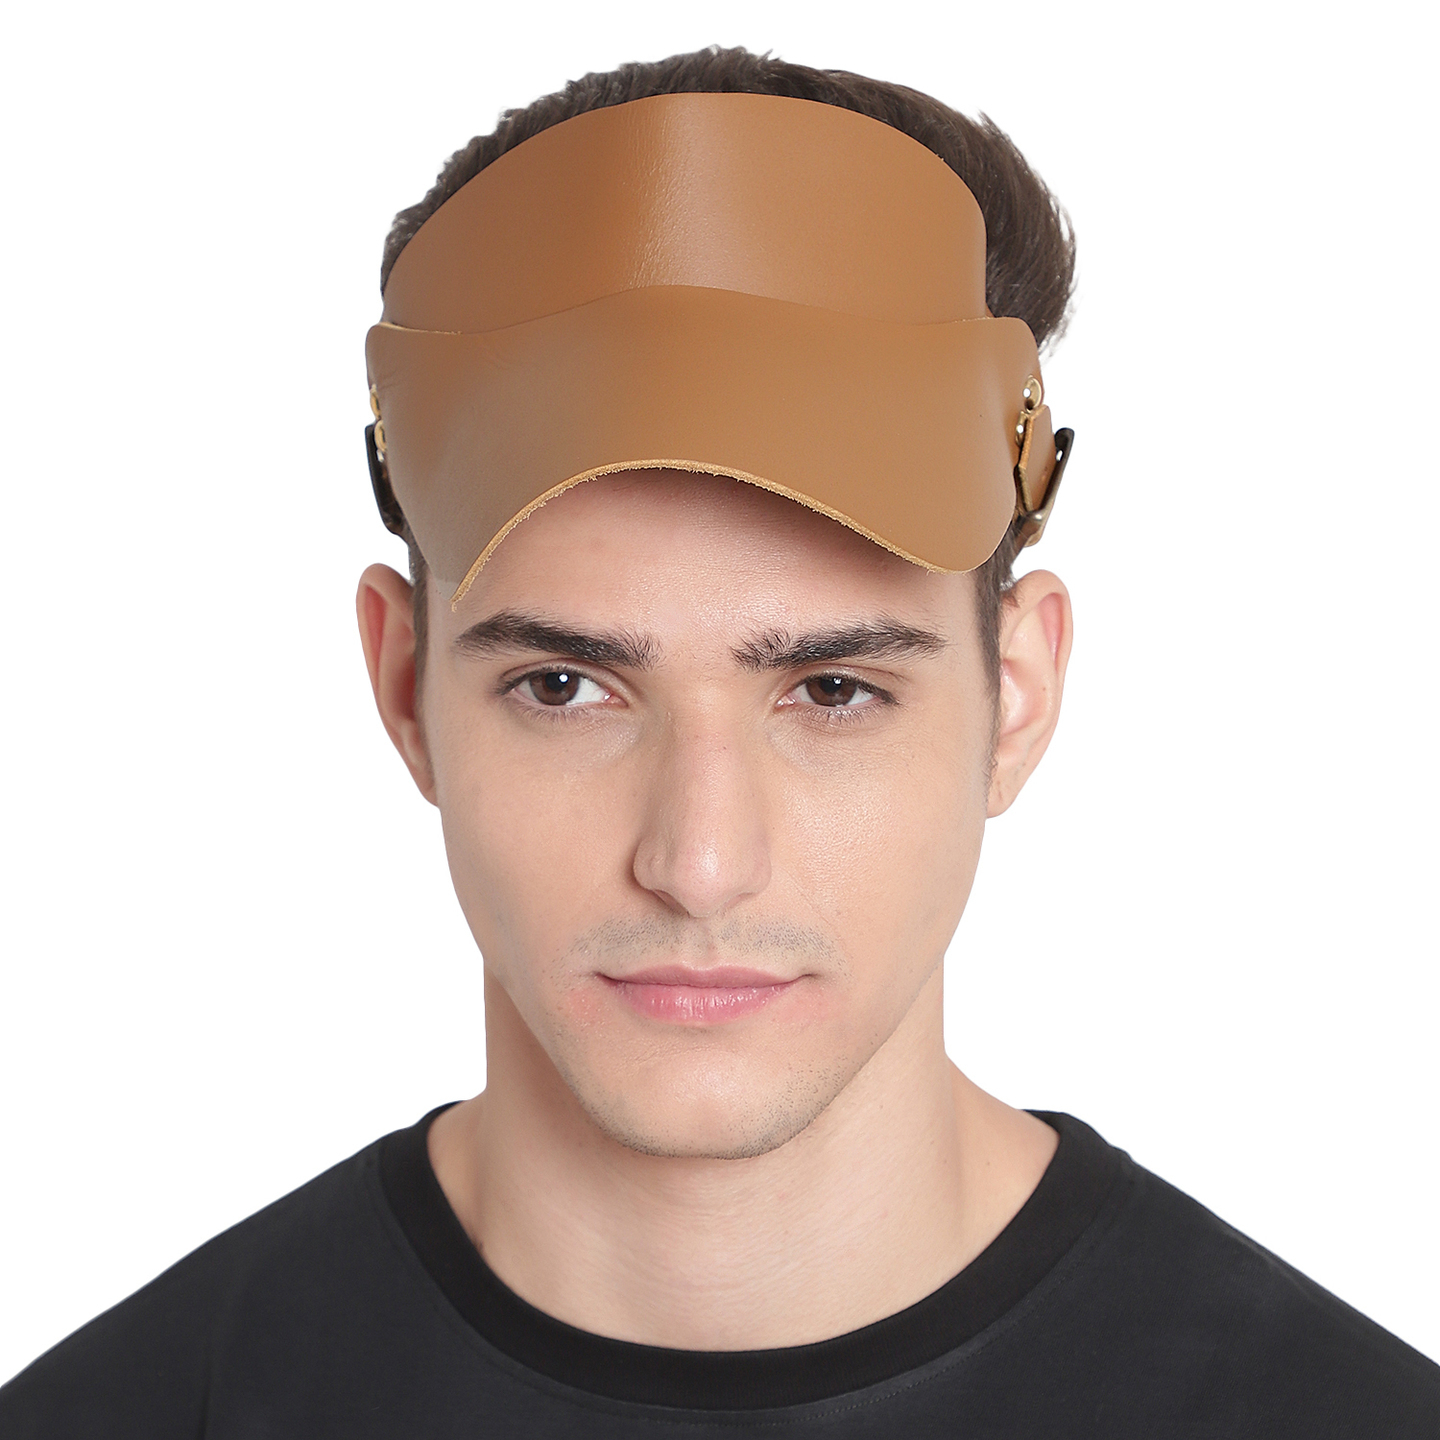 Panashe Isola Leather Visor Cap Desert Brown perfect for the beach, for urban walks, or for sports like golf, tennis,outdoors, travelling etc it will protect you from the suns rays. Desert Brown